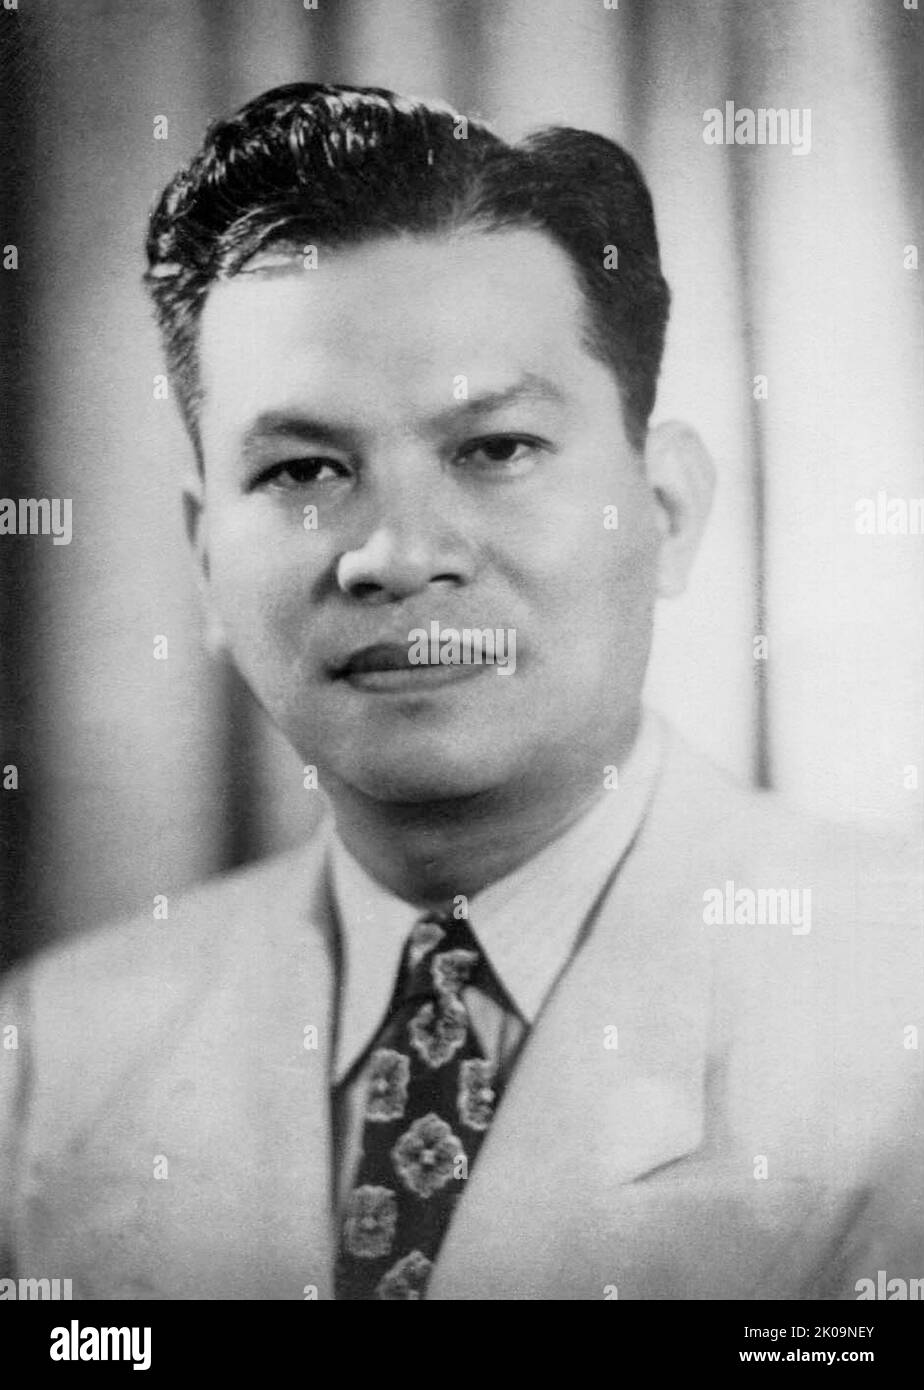 Ramon del Fierro Magsaysay Sr. (1907 - 1957) Filipino statesman who served as the seventh president of the Philippines, from December 30, 1953, until his death in an aircraft disaster on March 17, 1957. An automobile mechanic by profession, Magsaysay was appointed military governor of Zambales after his outstanding service as a guerrilla leader during the Pacific War. He then served two terms as Liberal Party congressman for Zambales's at-large district before being appointed Secretary of National Defense by President Elpidio Quirino. He was elected president under the banner of the Nacionalis Stock Photo